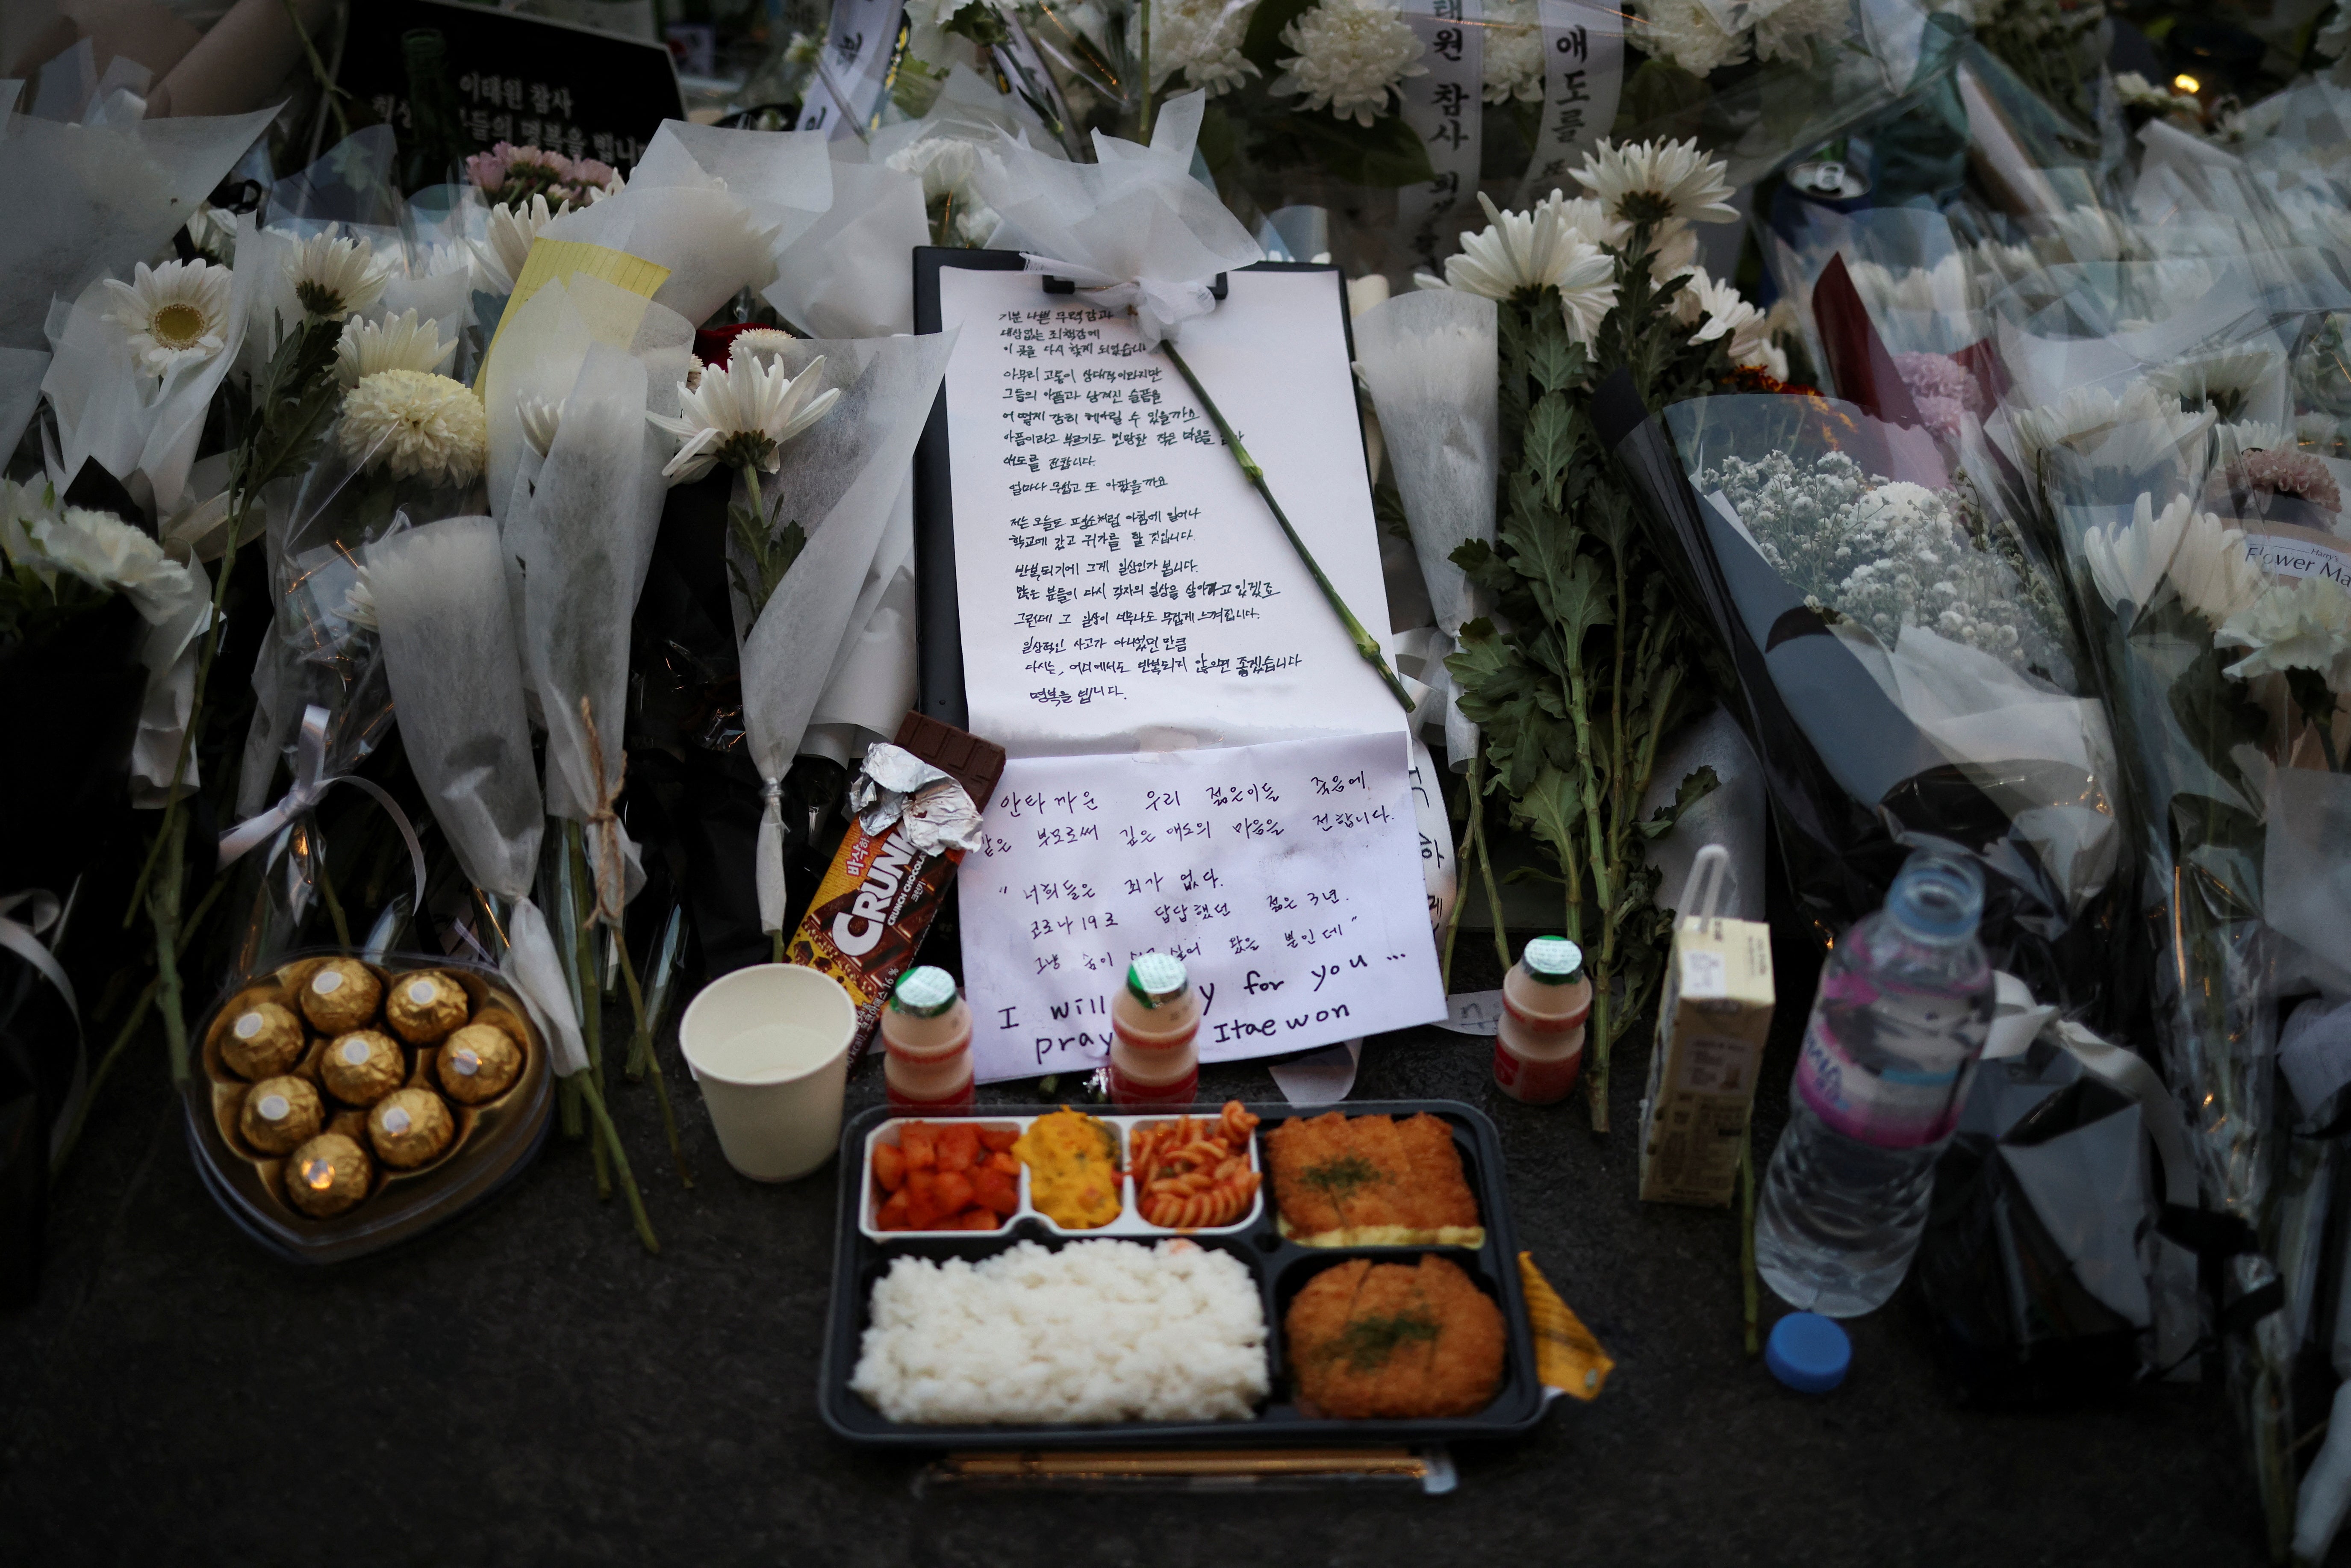 Meaningful notes and food left in tribute for those crushed in Itaewon